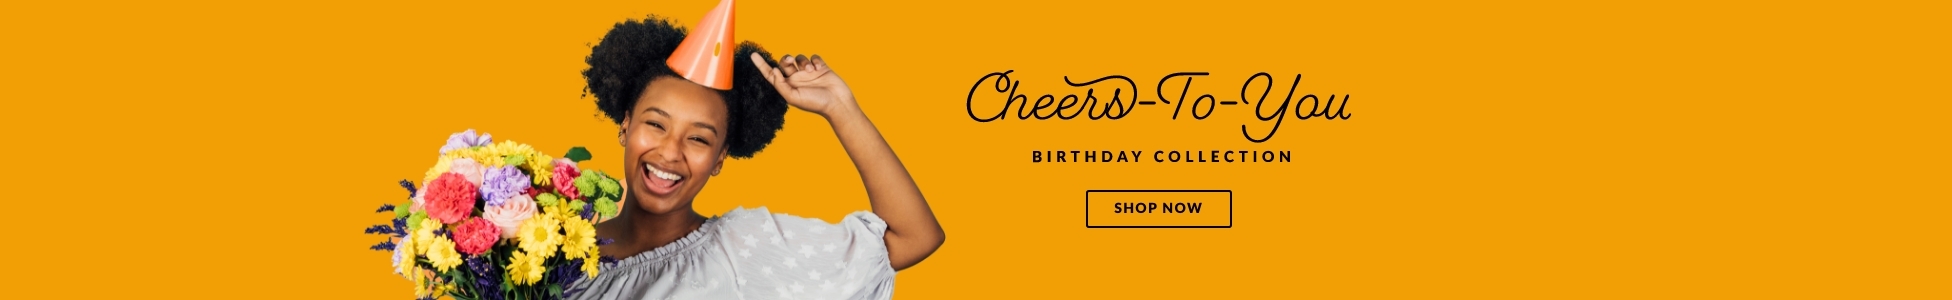 cheers-to-you-birthday-collection.jpg